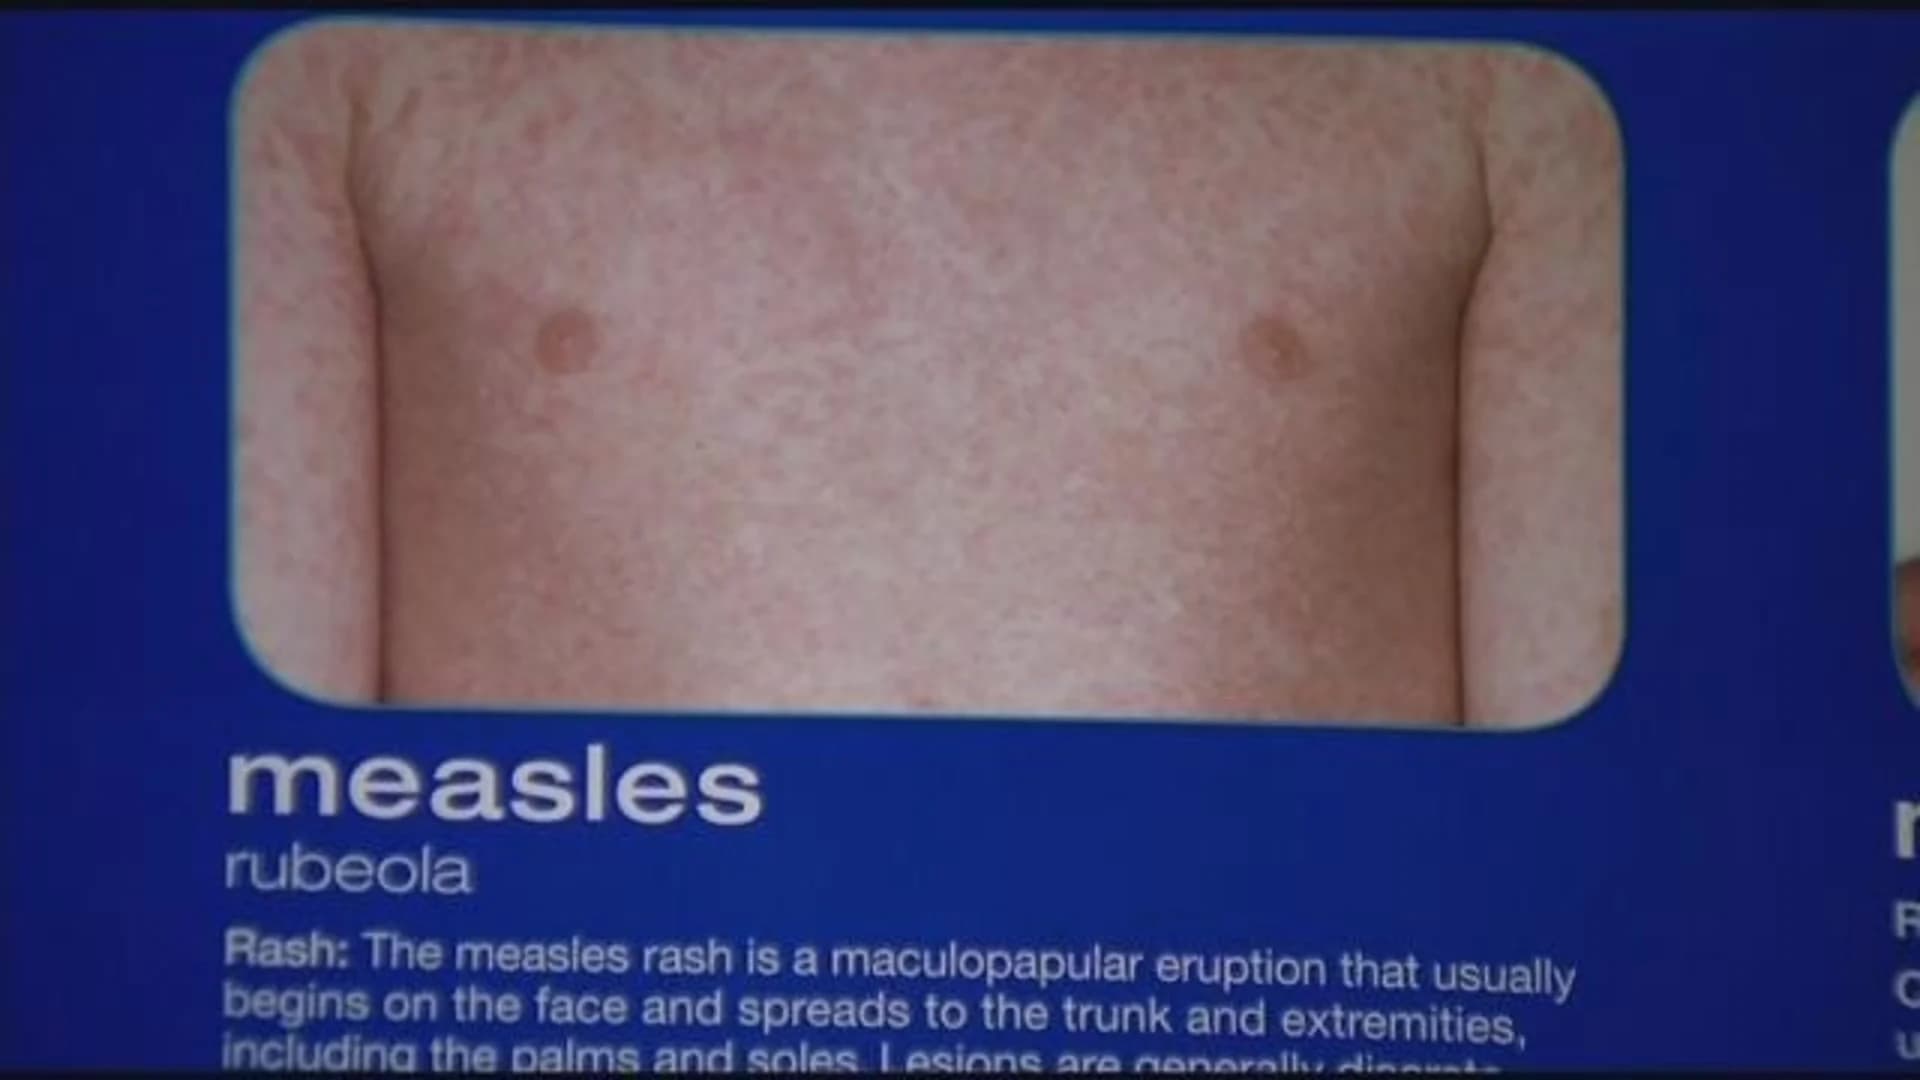 Rockland County declares state of emergency amidst measles outbreak